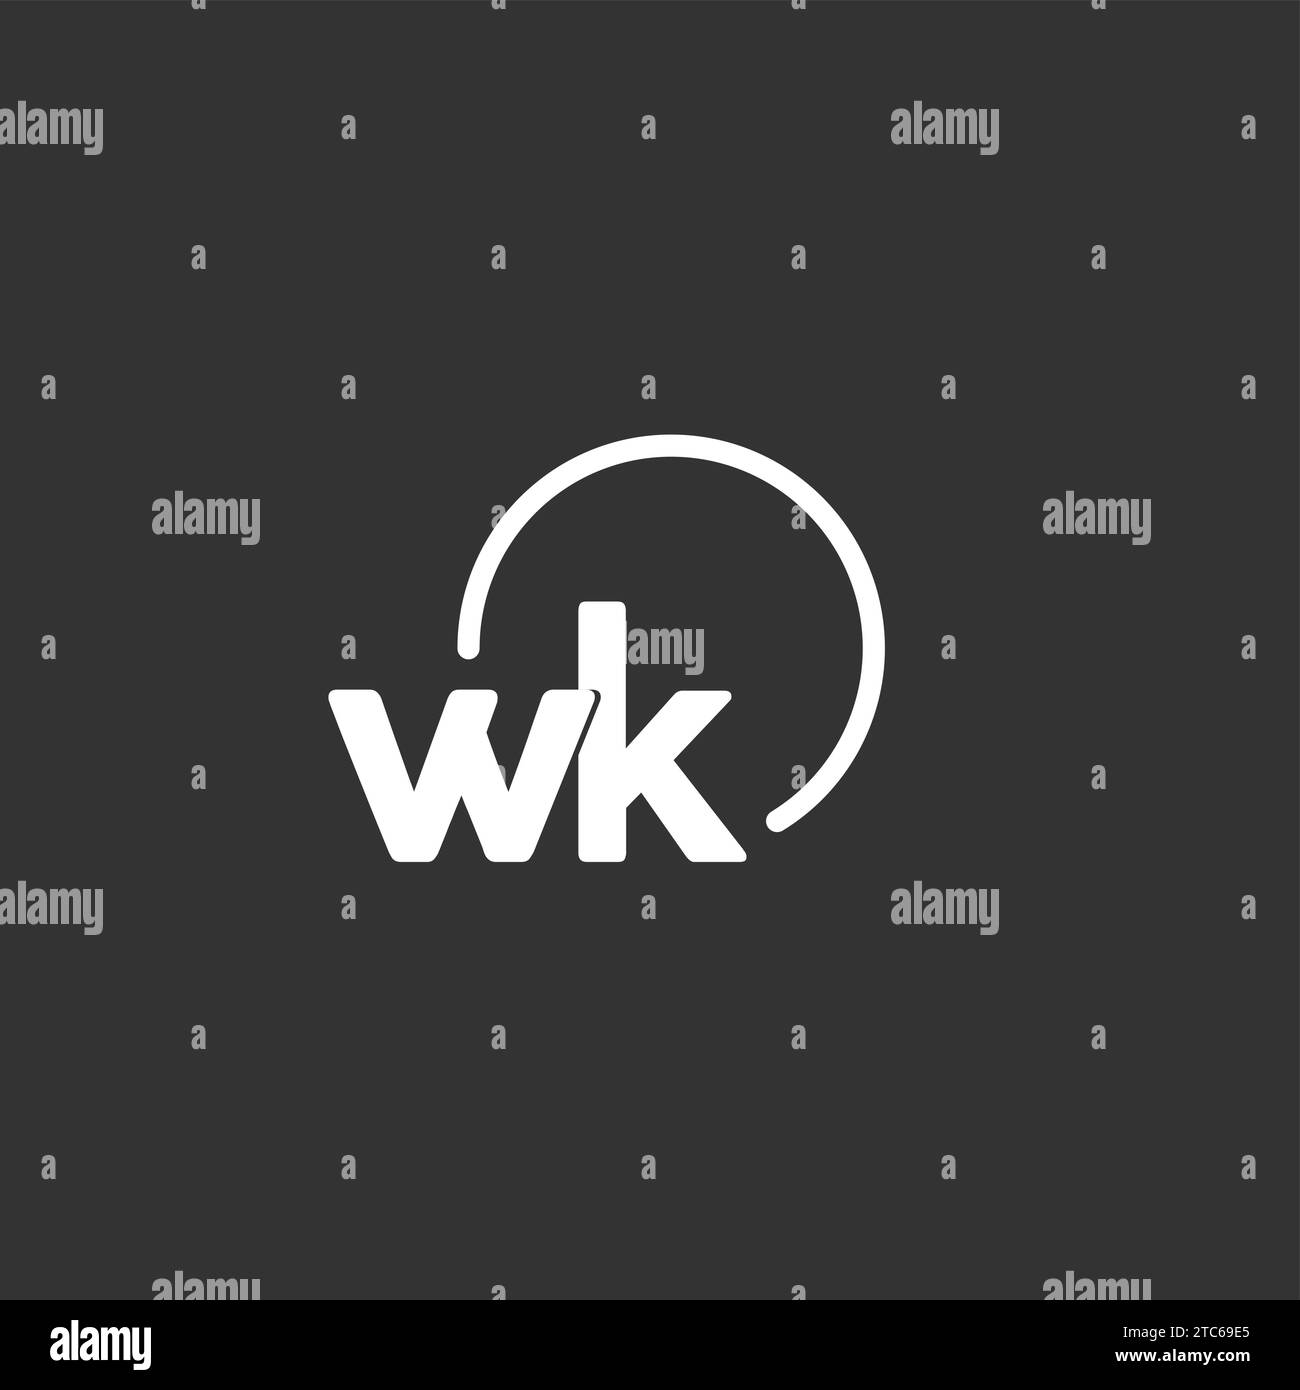 WK initial logo with rounded circle vector graphic Stock Vector